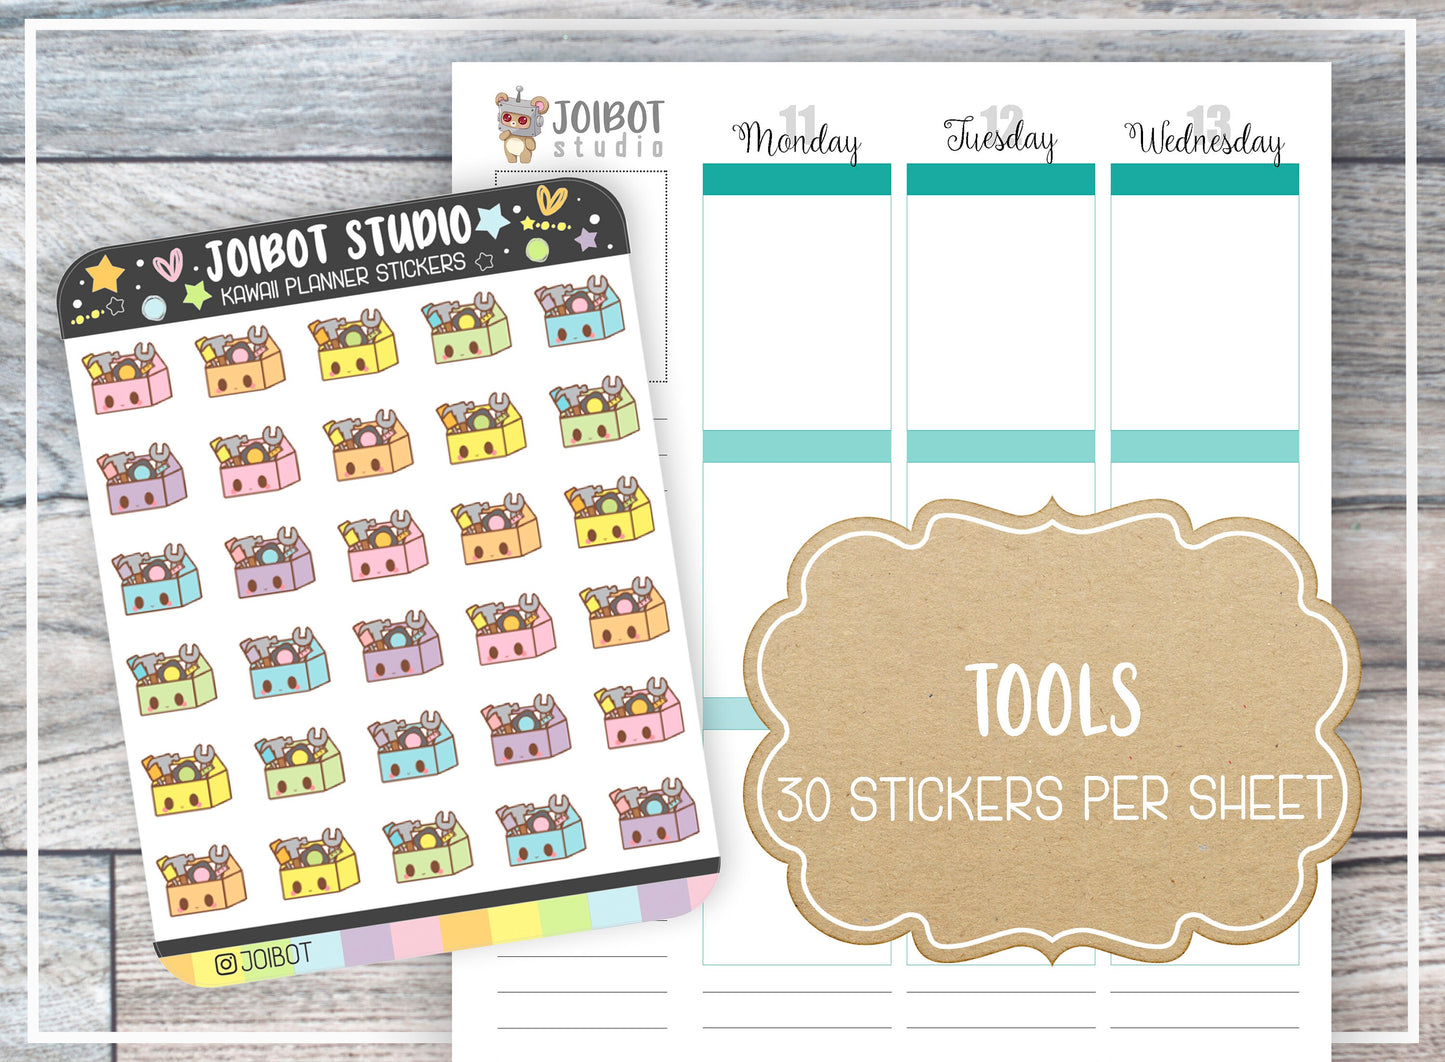 TOOLS - Kawaii Planner Stickers - Home Stickers - Journal Stickers - Cute Stickers - Decorative Stickers - K0179